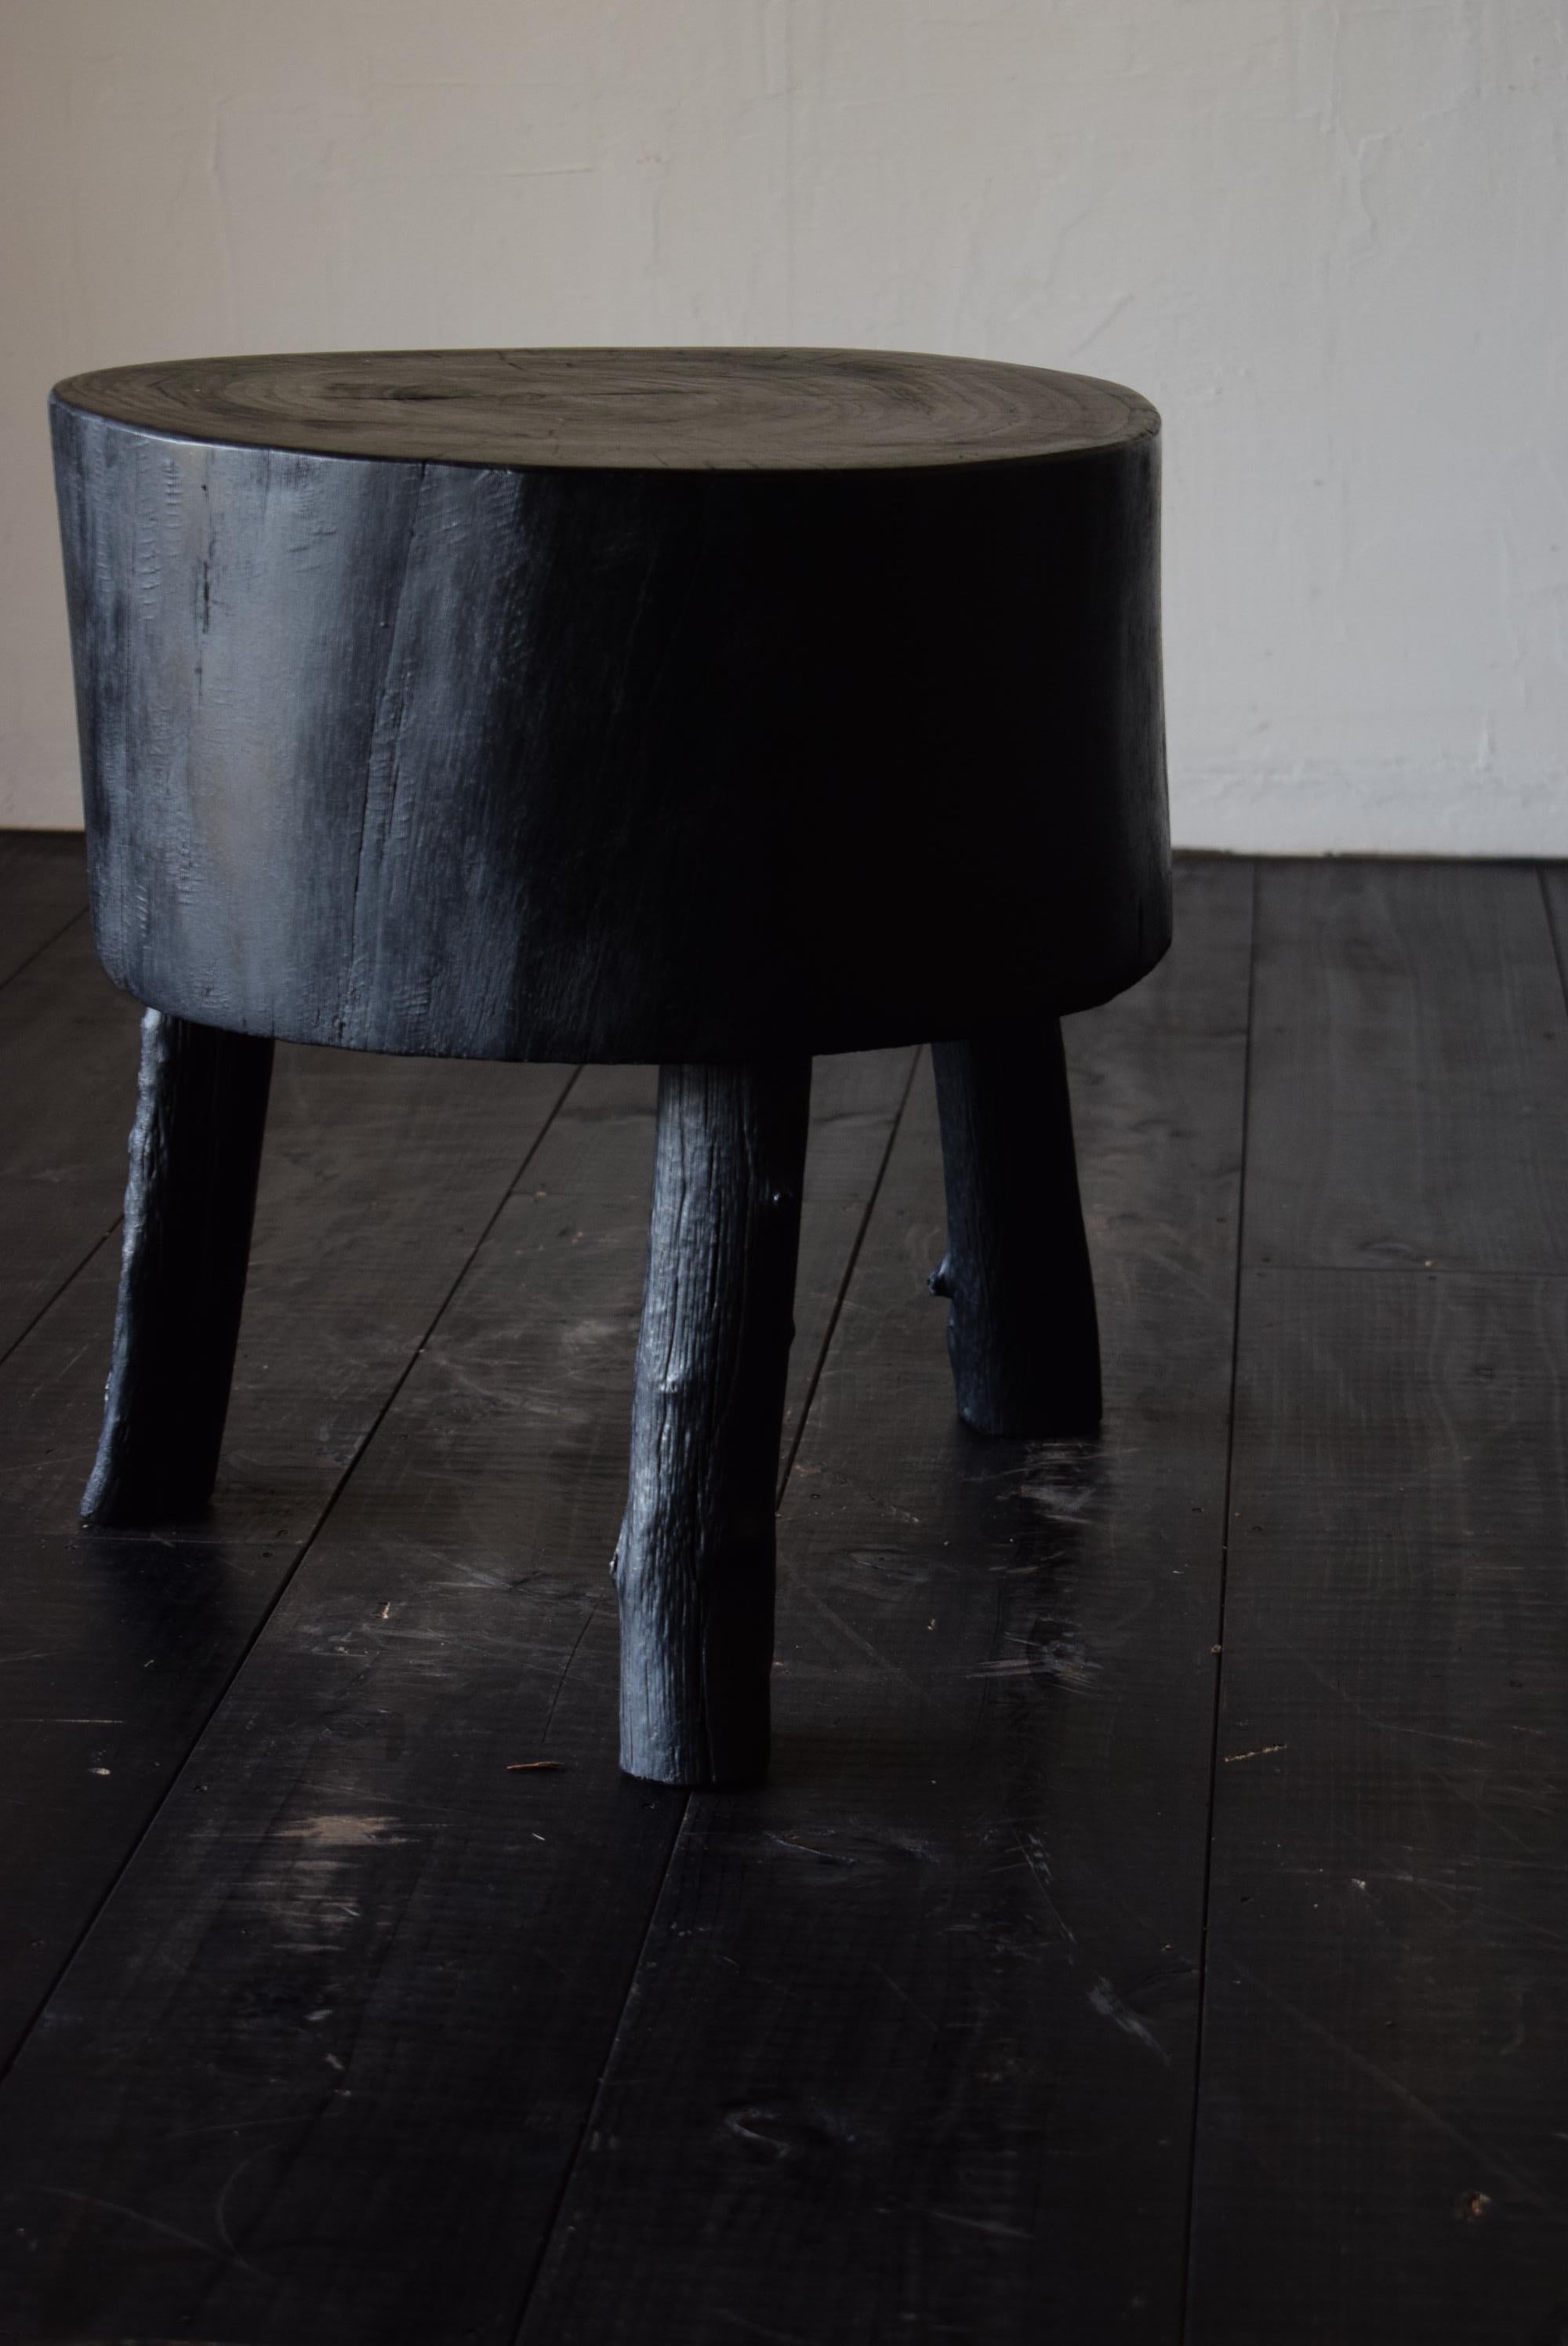 It will be a new material stool. It is a stool that gives you a feeling of Japanese beauty and wabi-sabi with a finish similar to lacquer.

It is a size and weight that can be used for a side table.

Size: W 50 D 45 H 43(cm)
Weight about 15kg.